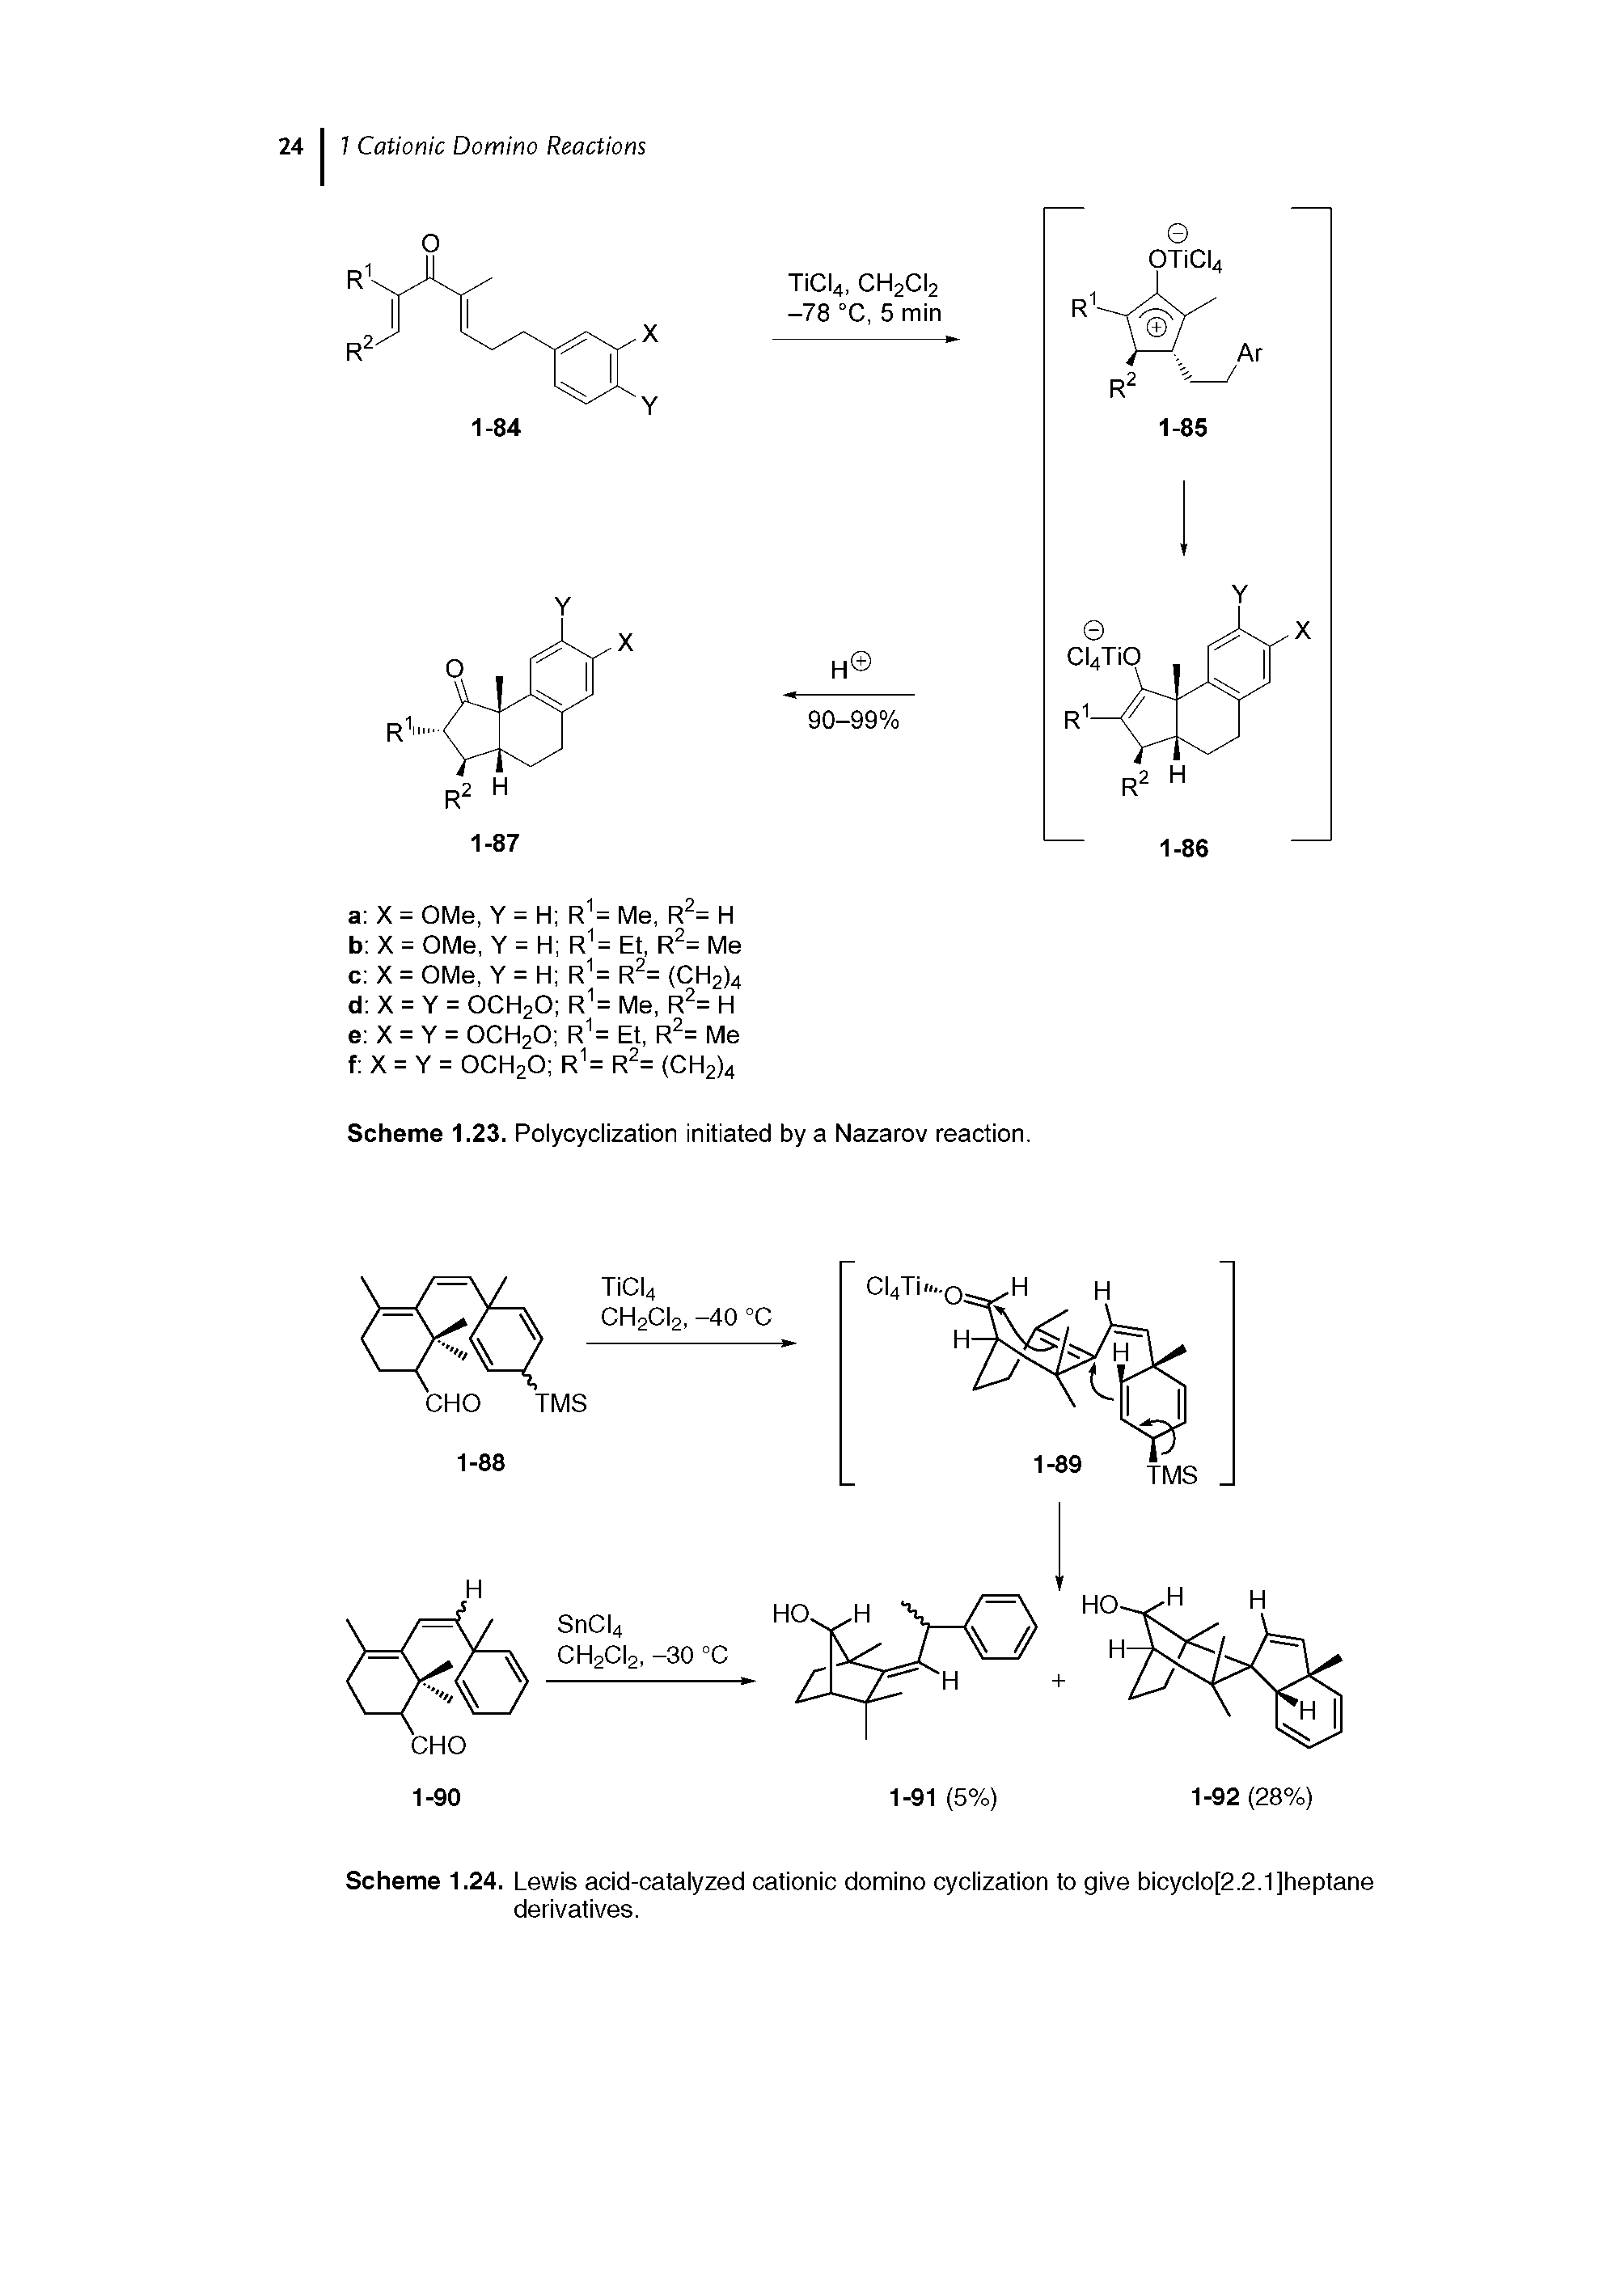 Scheme 1.24. Lewis acid-catalyzed cationic domino cyclization to give bicyclo[2.2.1]heptane derivatives.